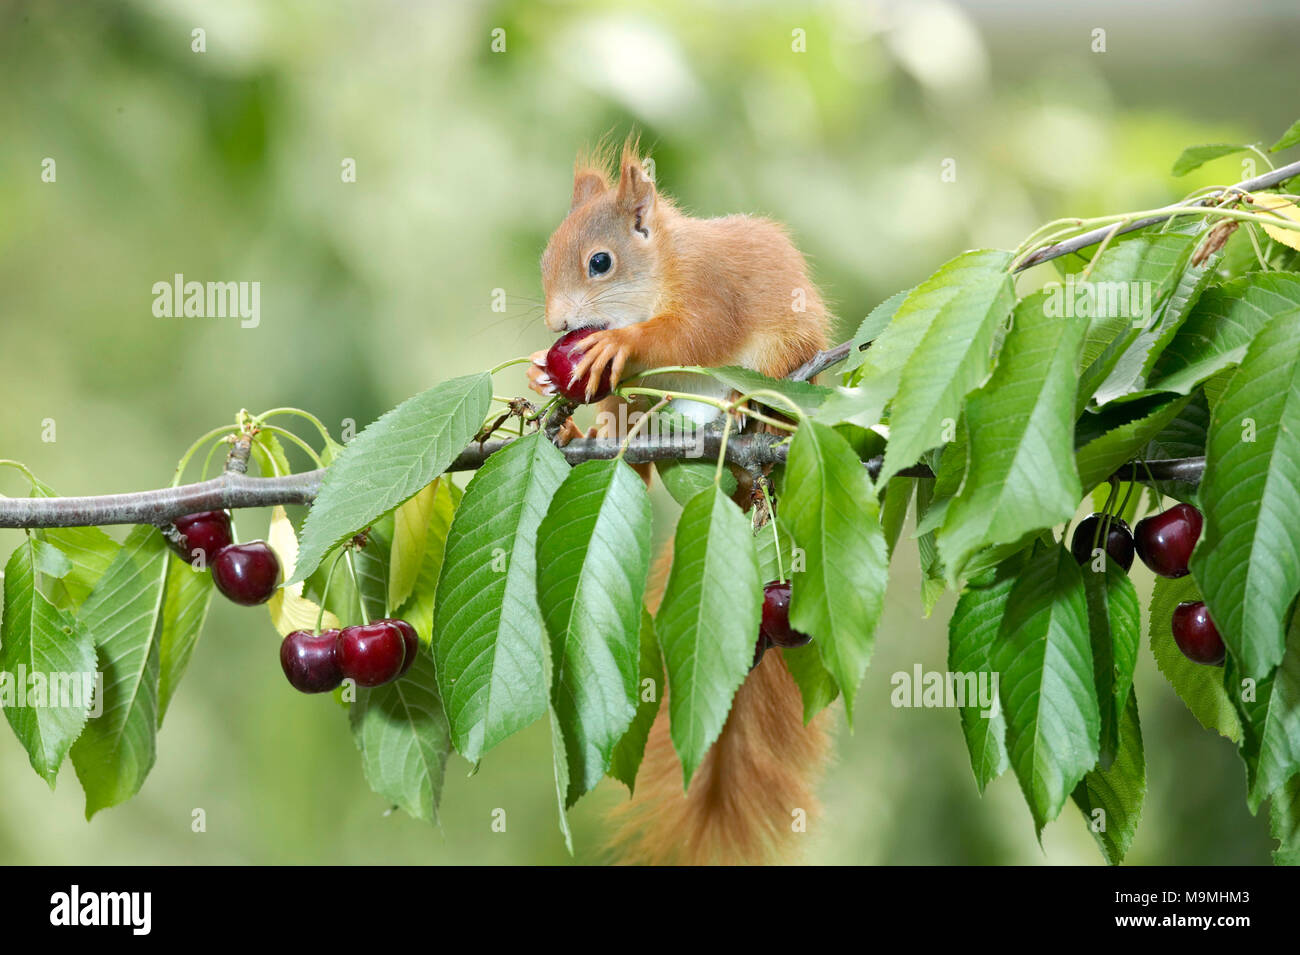 European Red Squirrel (Sciurus vulgaris). Adult eating a cherry in a cherry tree. Germany Stock Photo